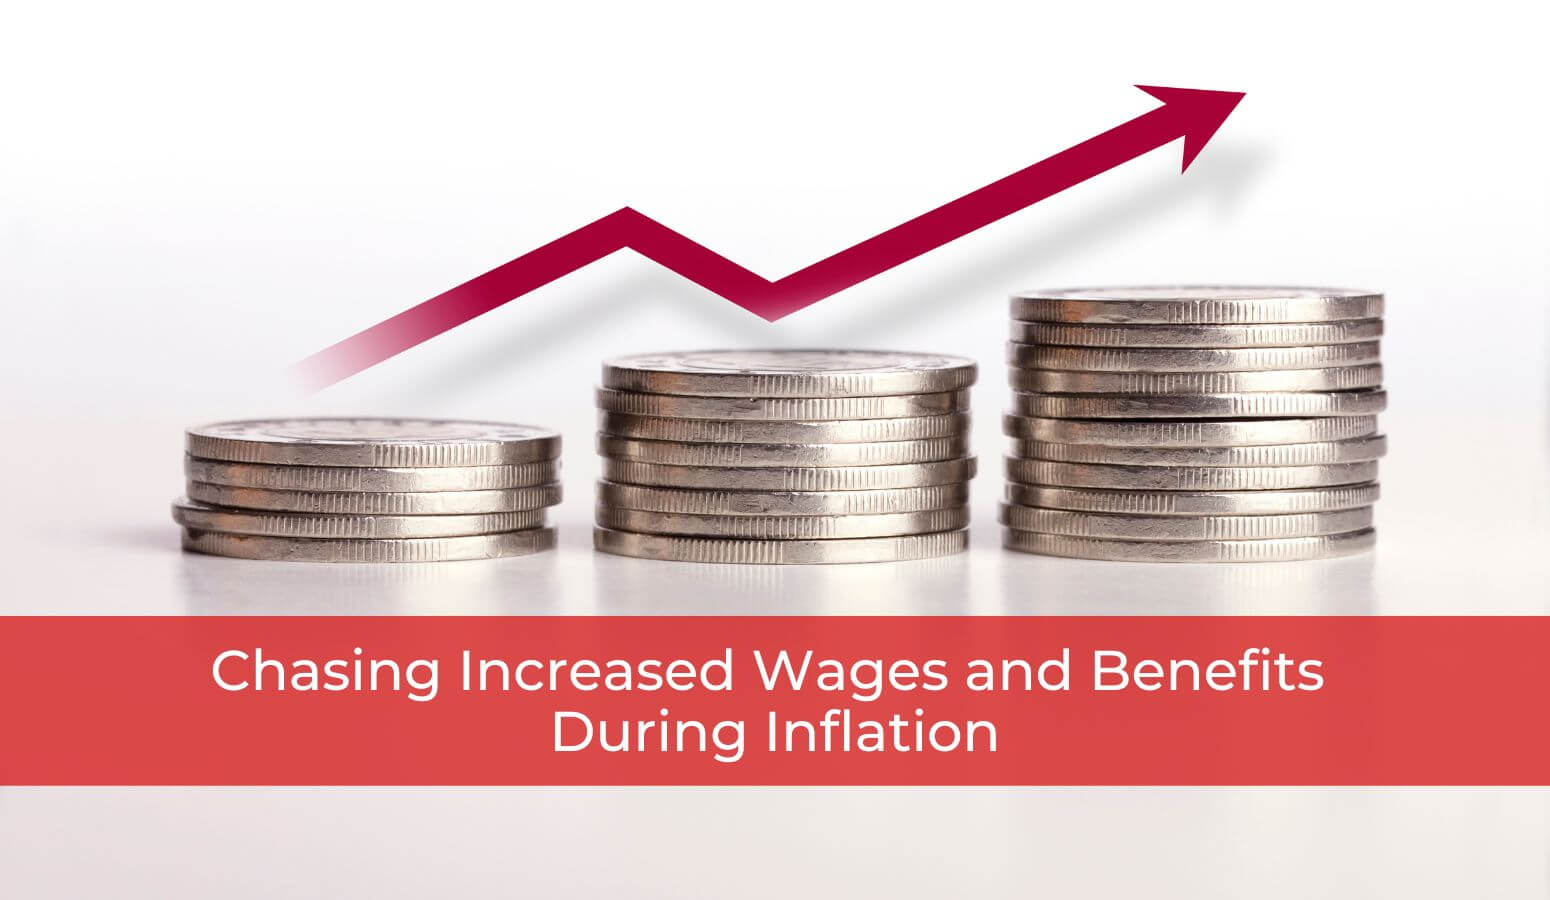 Featured image for “Chasing Increased Wages and Benefits During Inflation”